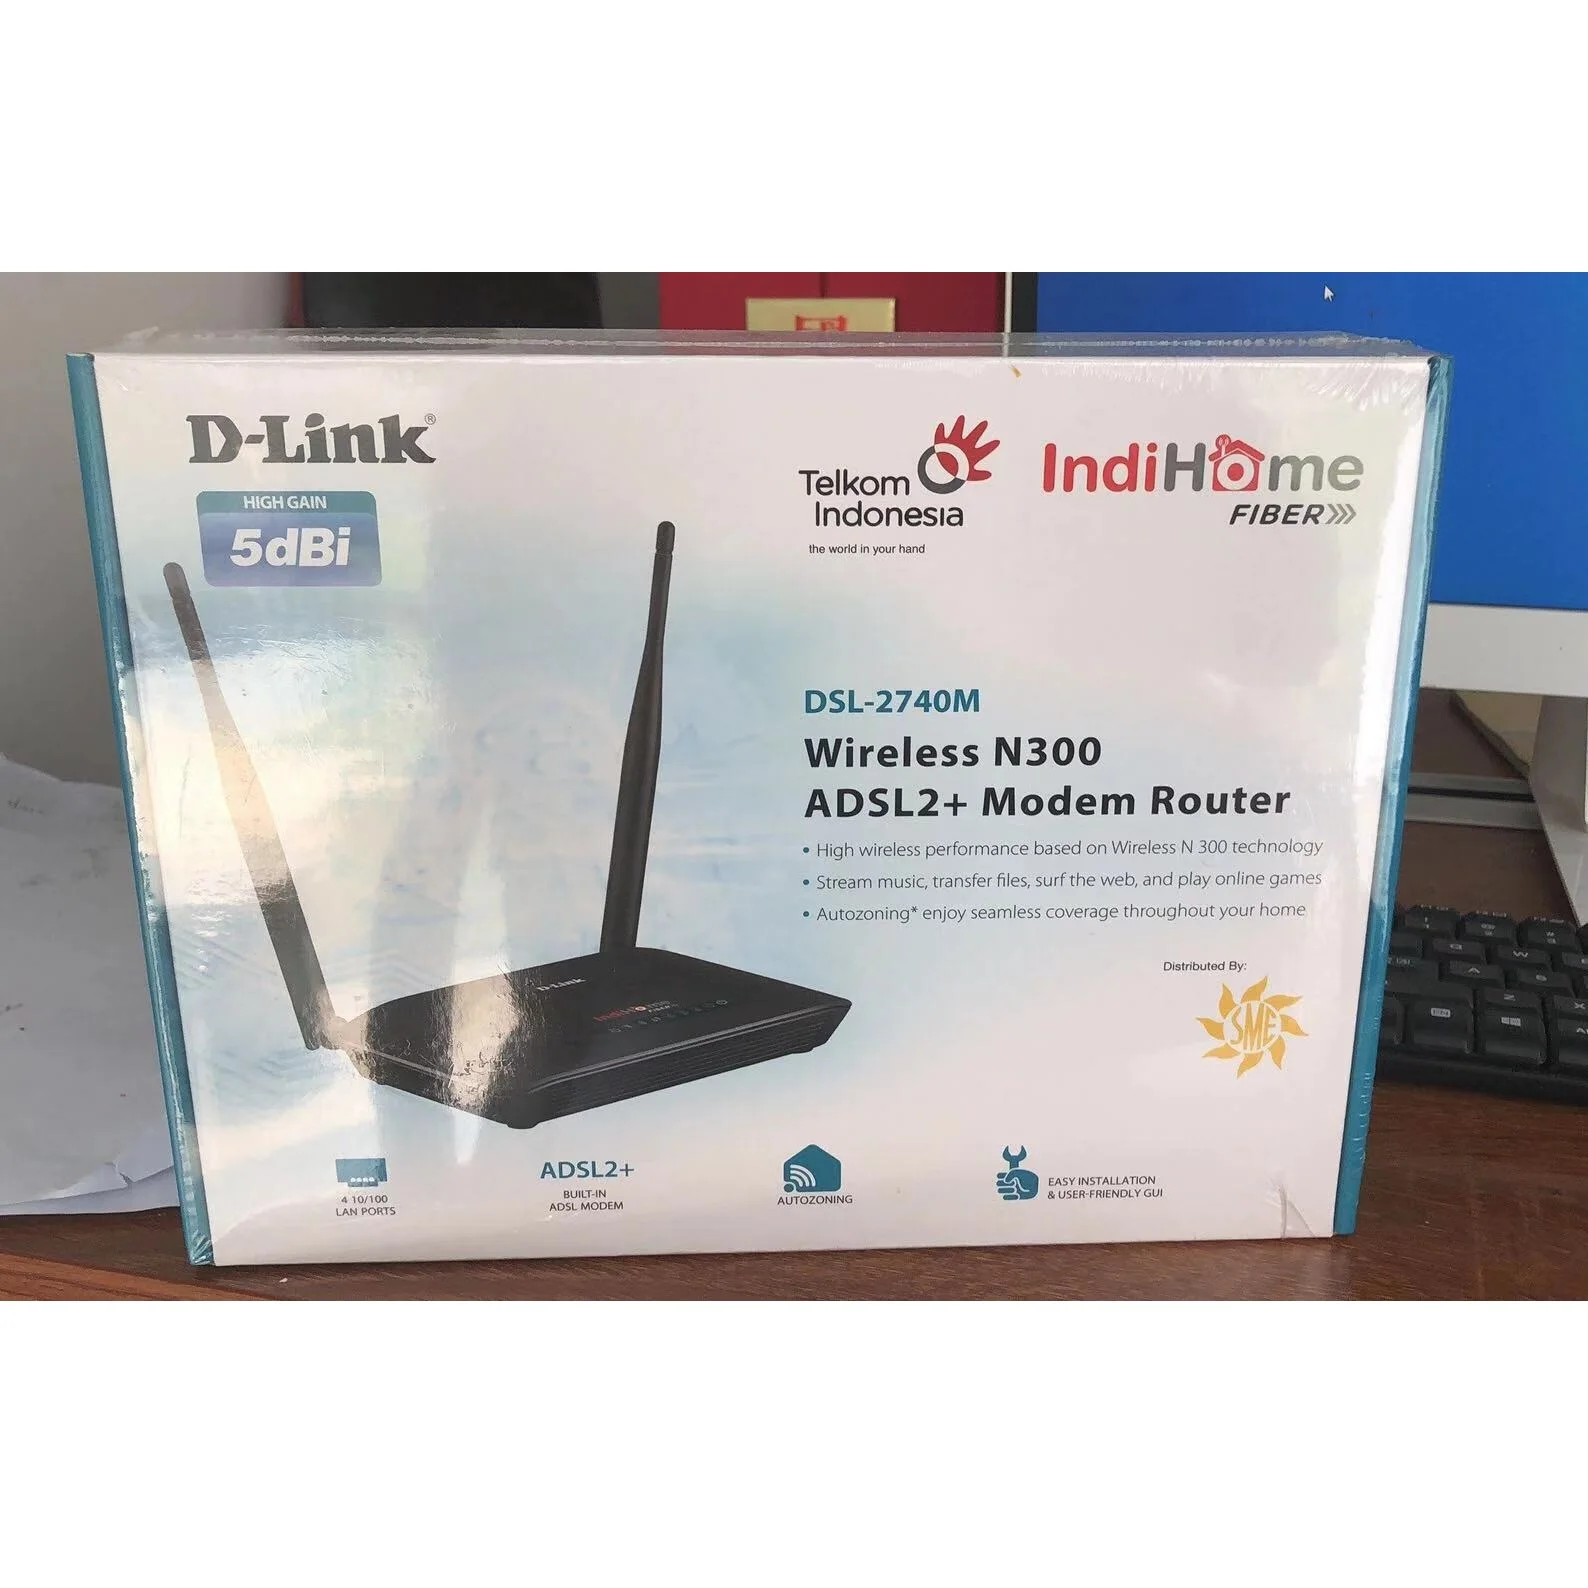 Extreme poverty Ancient times File 300m Adsl Wireless Router D-link Dsl-2740m Wireless N300 Adsl2+ Modem Router  - 4x 10/100 Fast Ethernet Lan Ports Pk Tp-link - Buy D-link Wifi Router, Wireless Adsl2 Modem Router,300m Adsl Router Product on